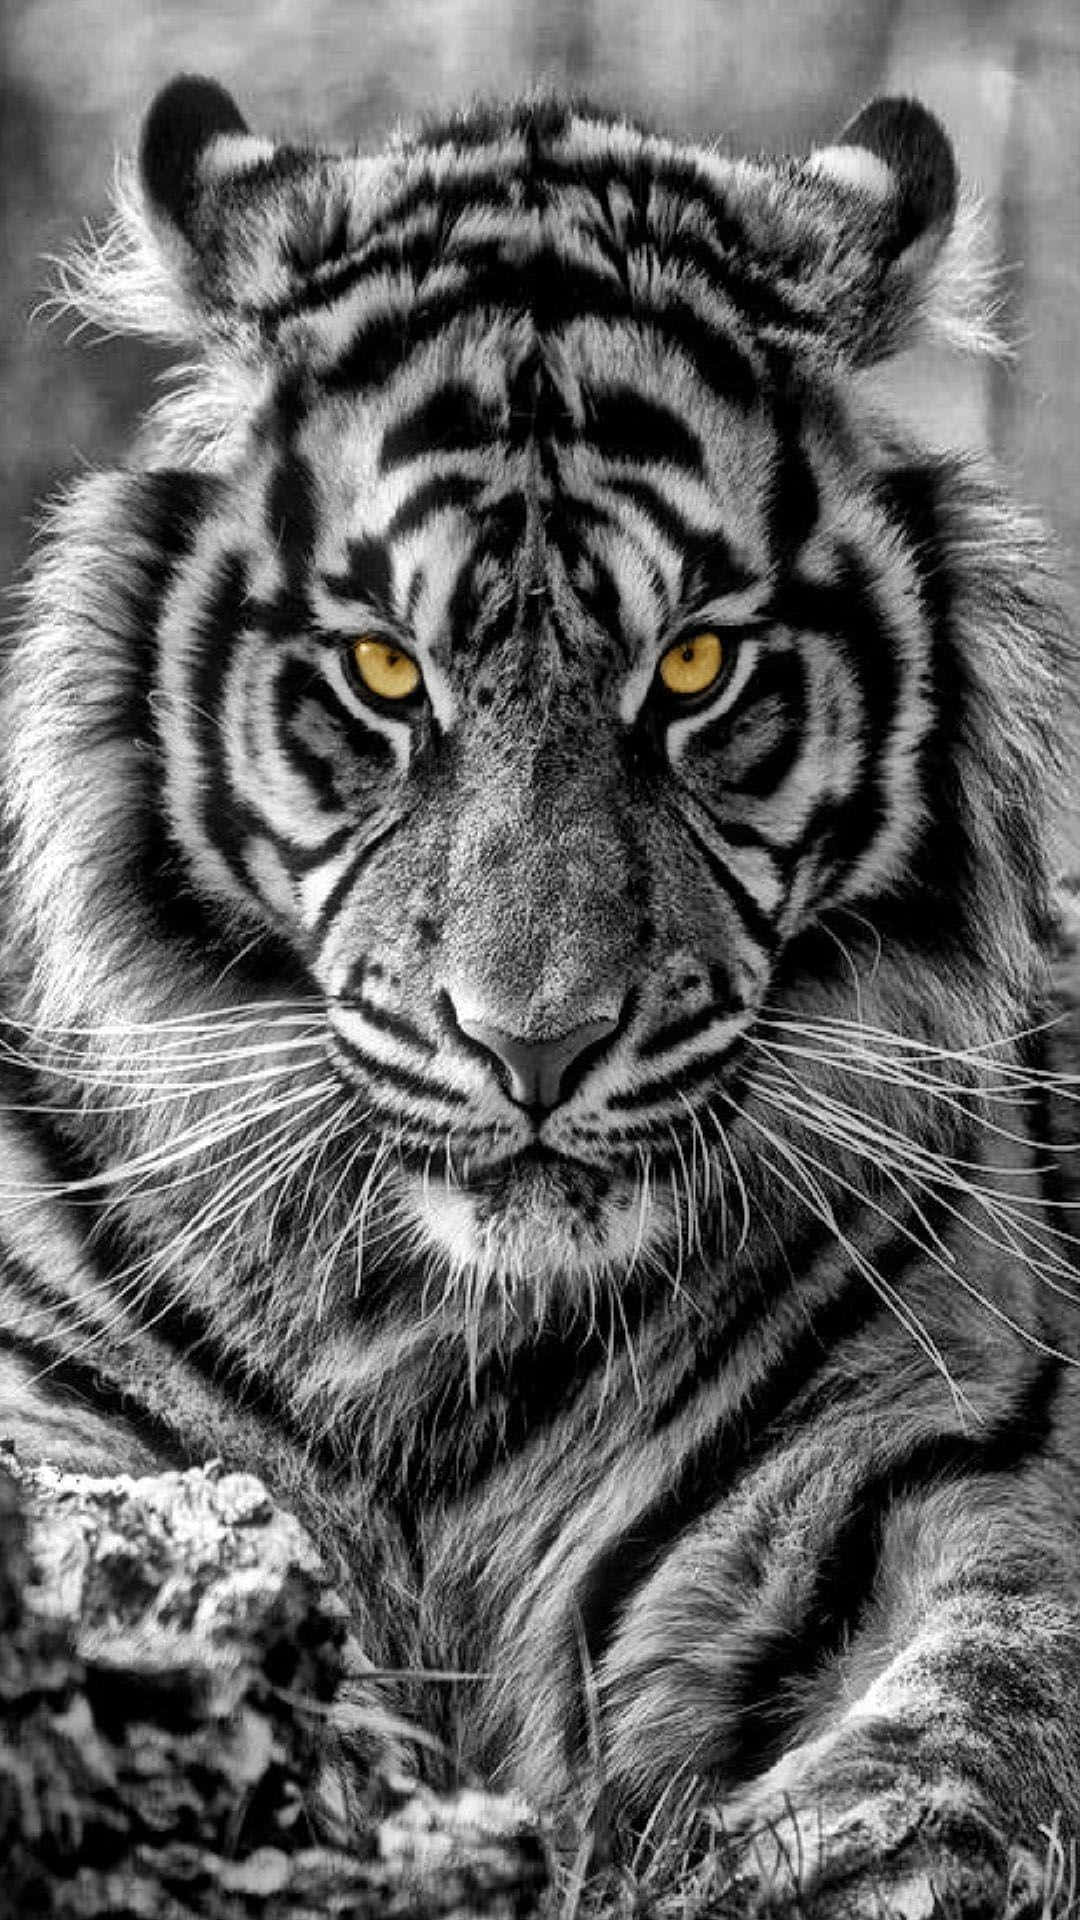 Connect with Nature with Tiger Phone Wallpaper